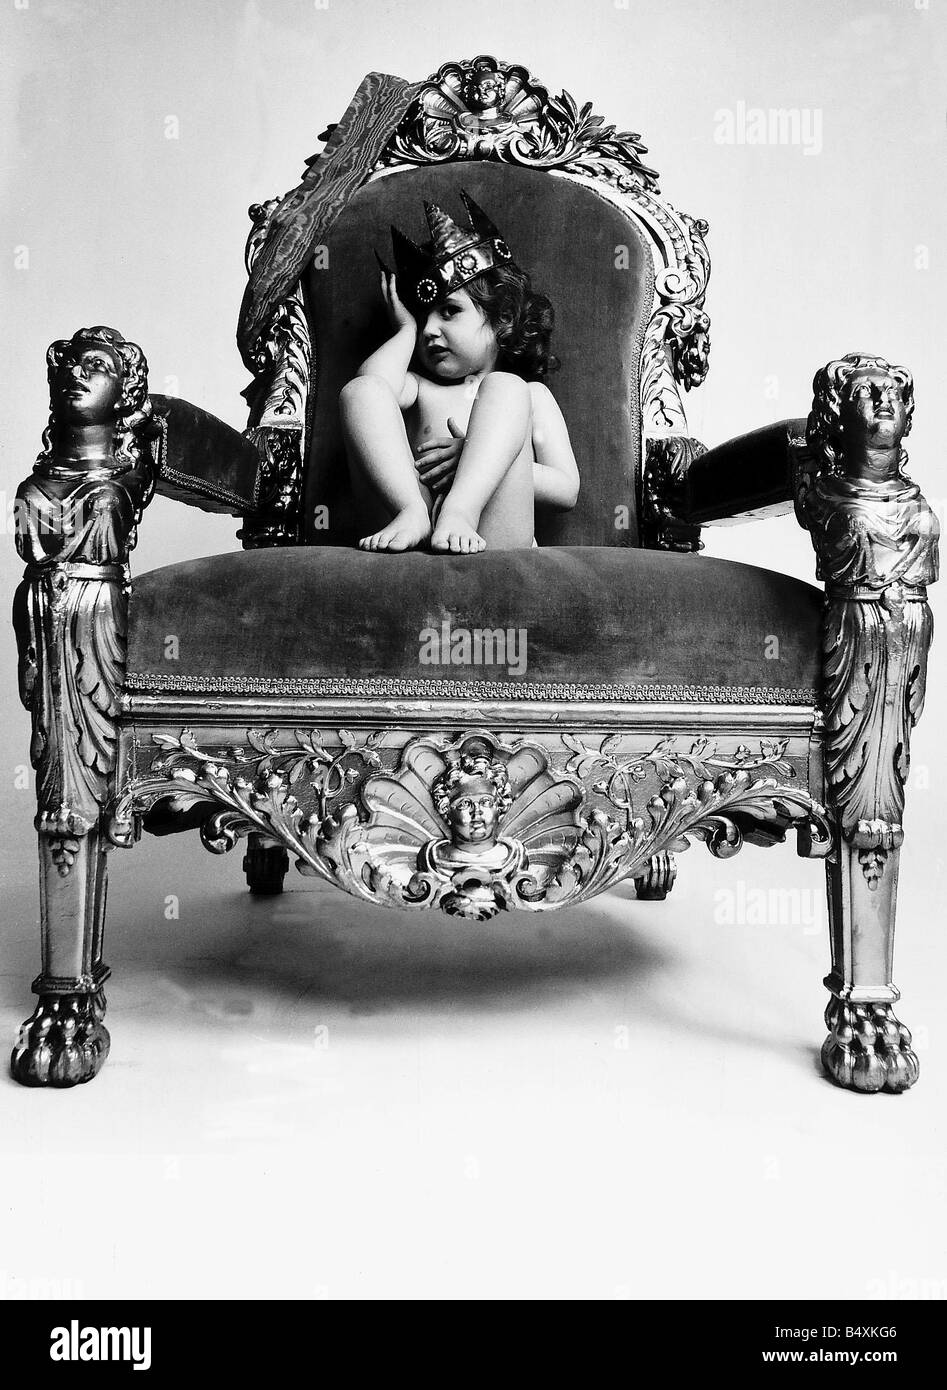 Mini Miss world competition 1972 Tamsina from Ilford Essex sitting on chair Stock Photo